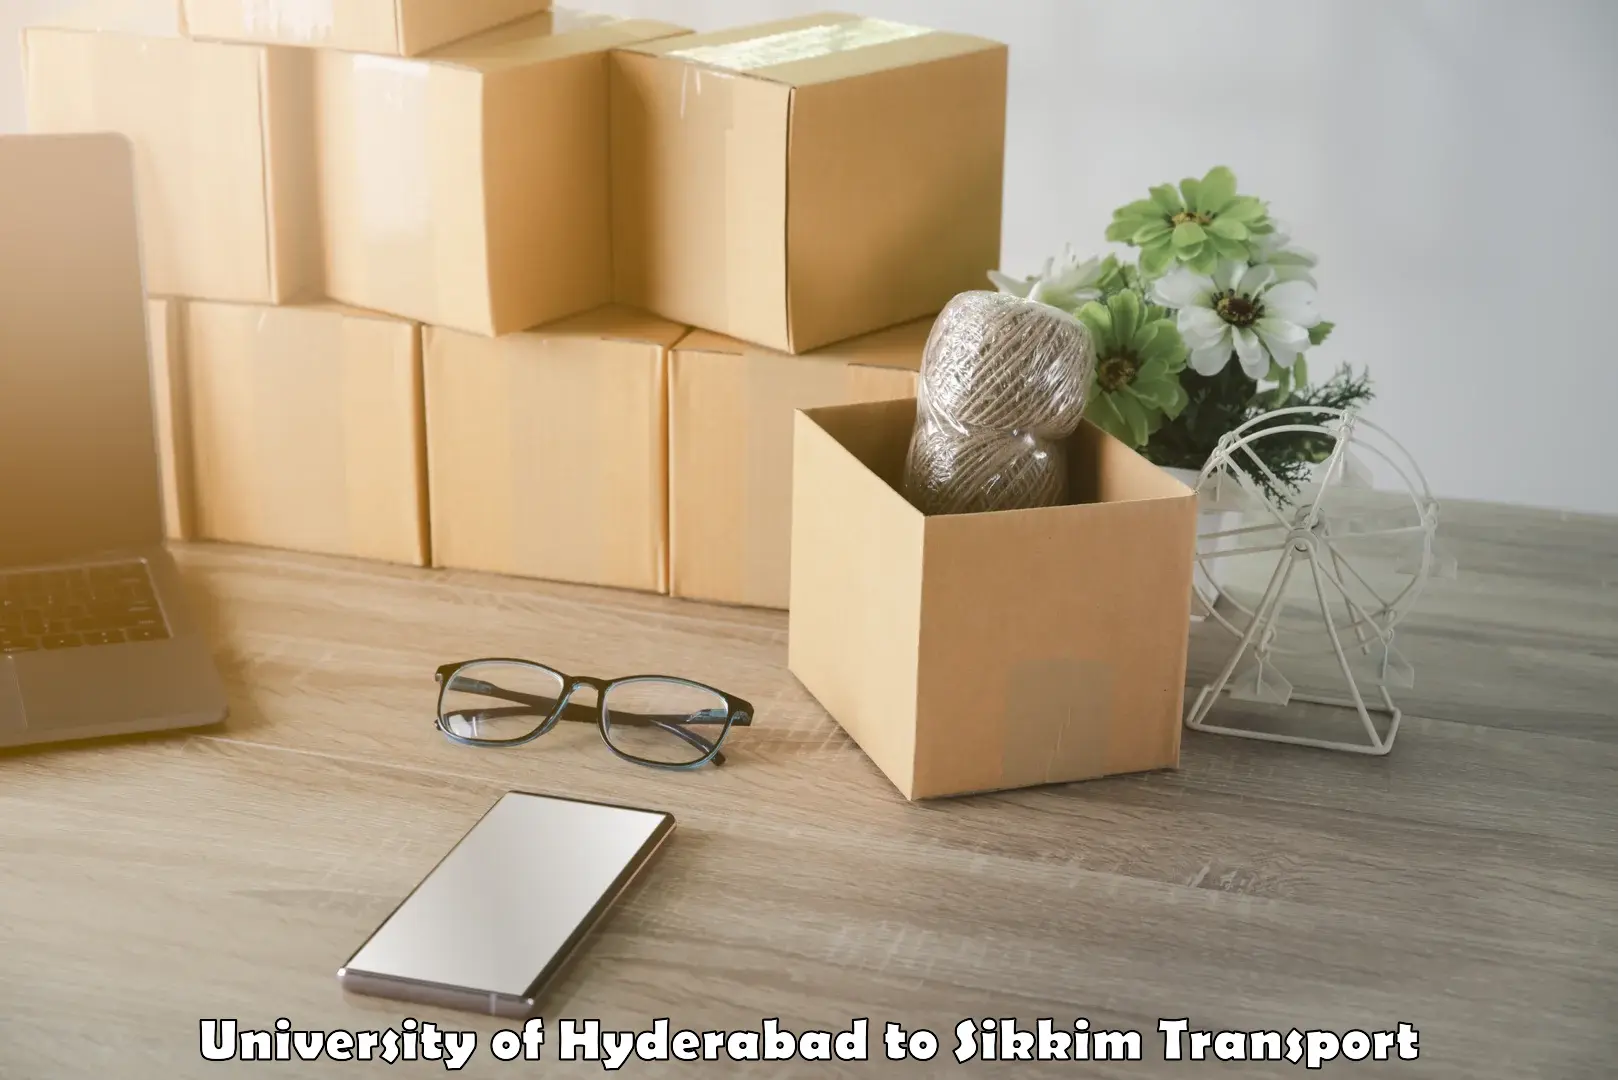 Transport bike from one state to another University of Hyderabad to Sikkim